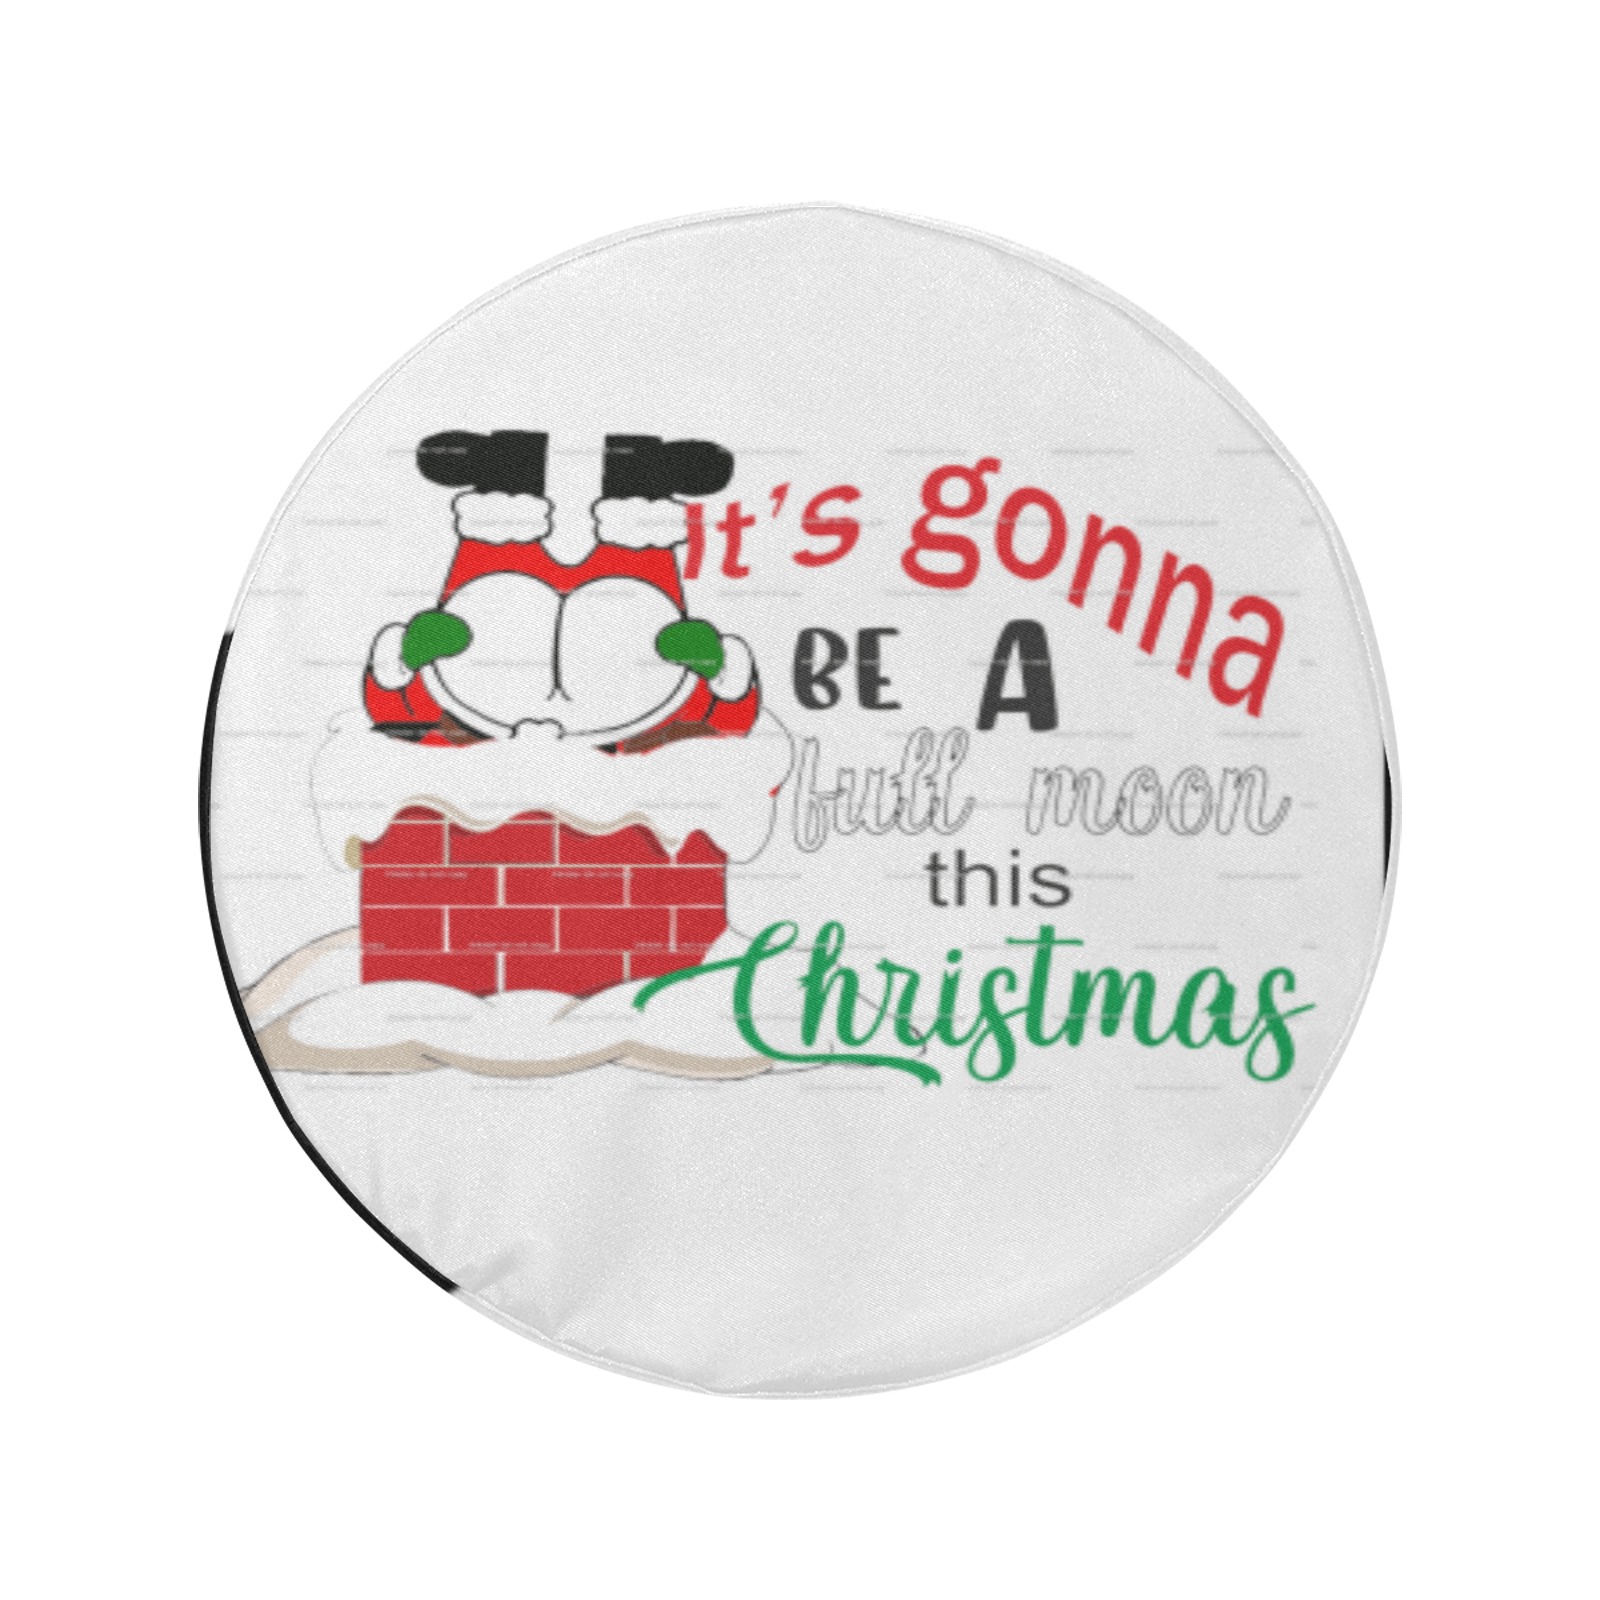 full moon christmas34 34 Inch Spare Tire Cover